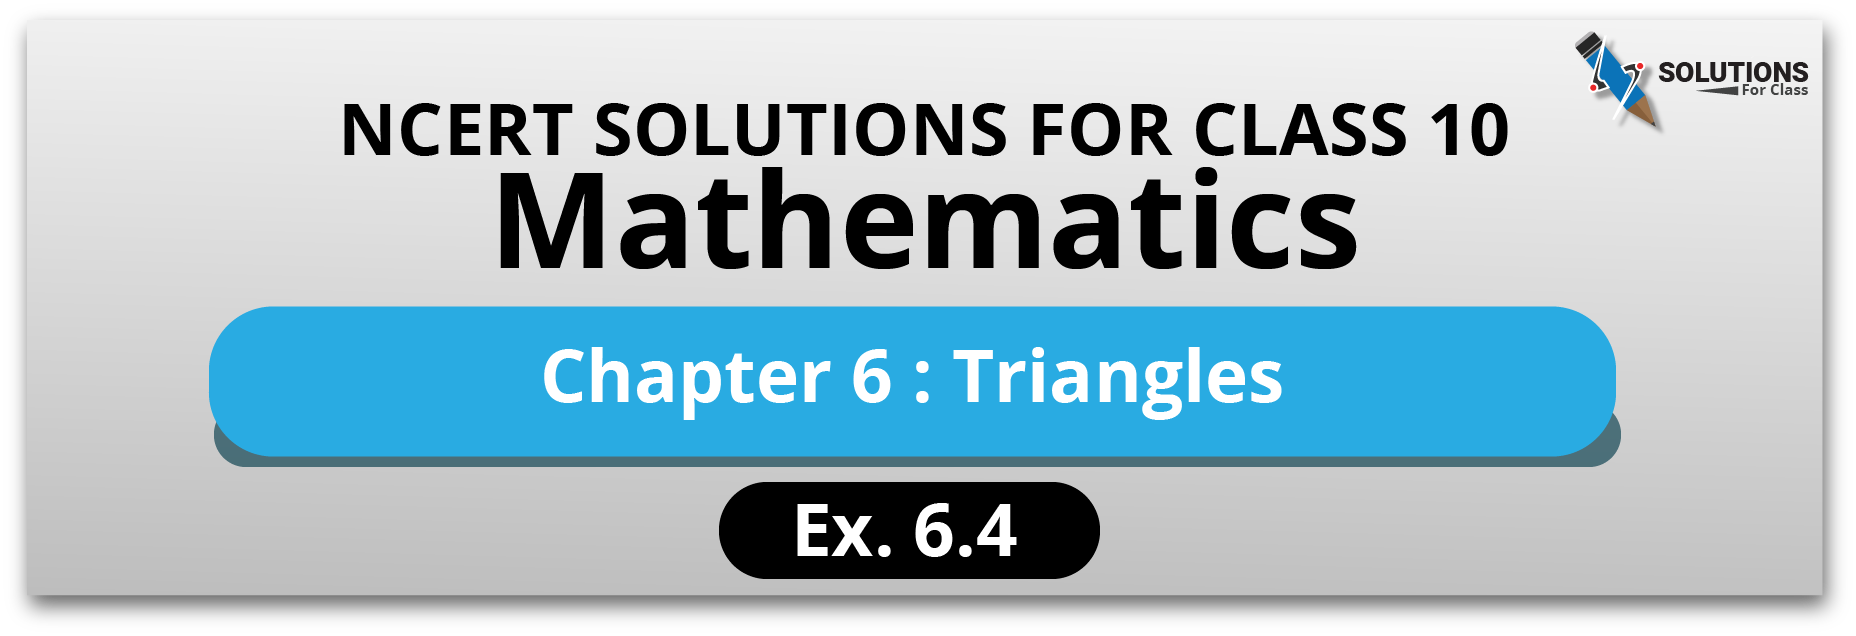 NCERT Solution For Class 10, Maths, Chapter 6 Triangles, Exercise 6.4